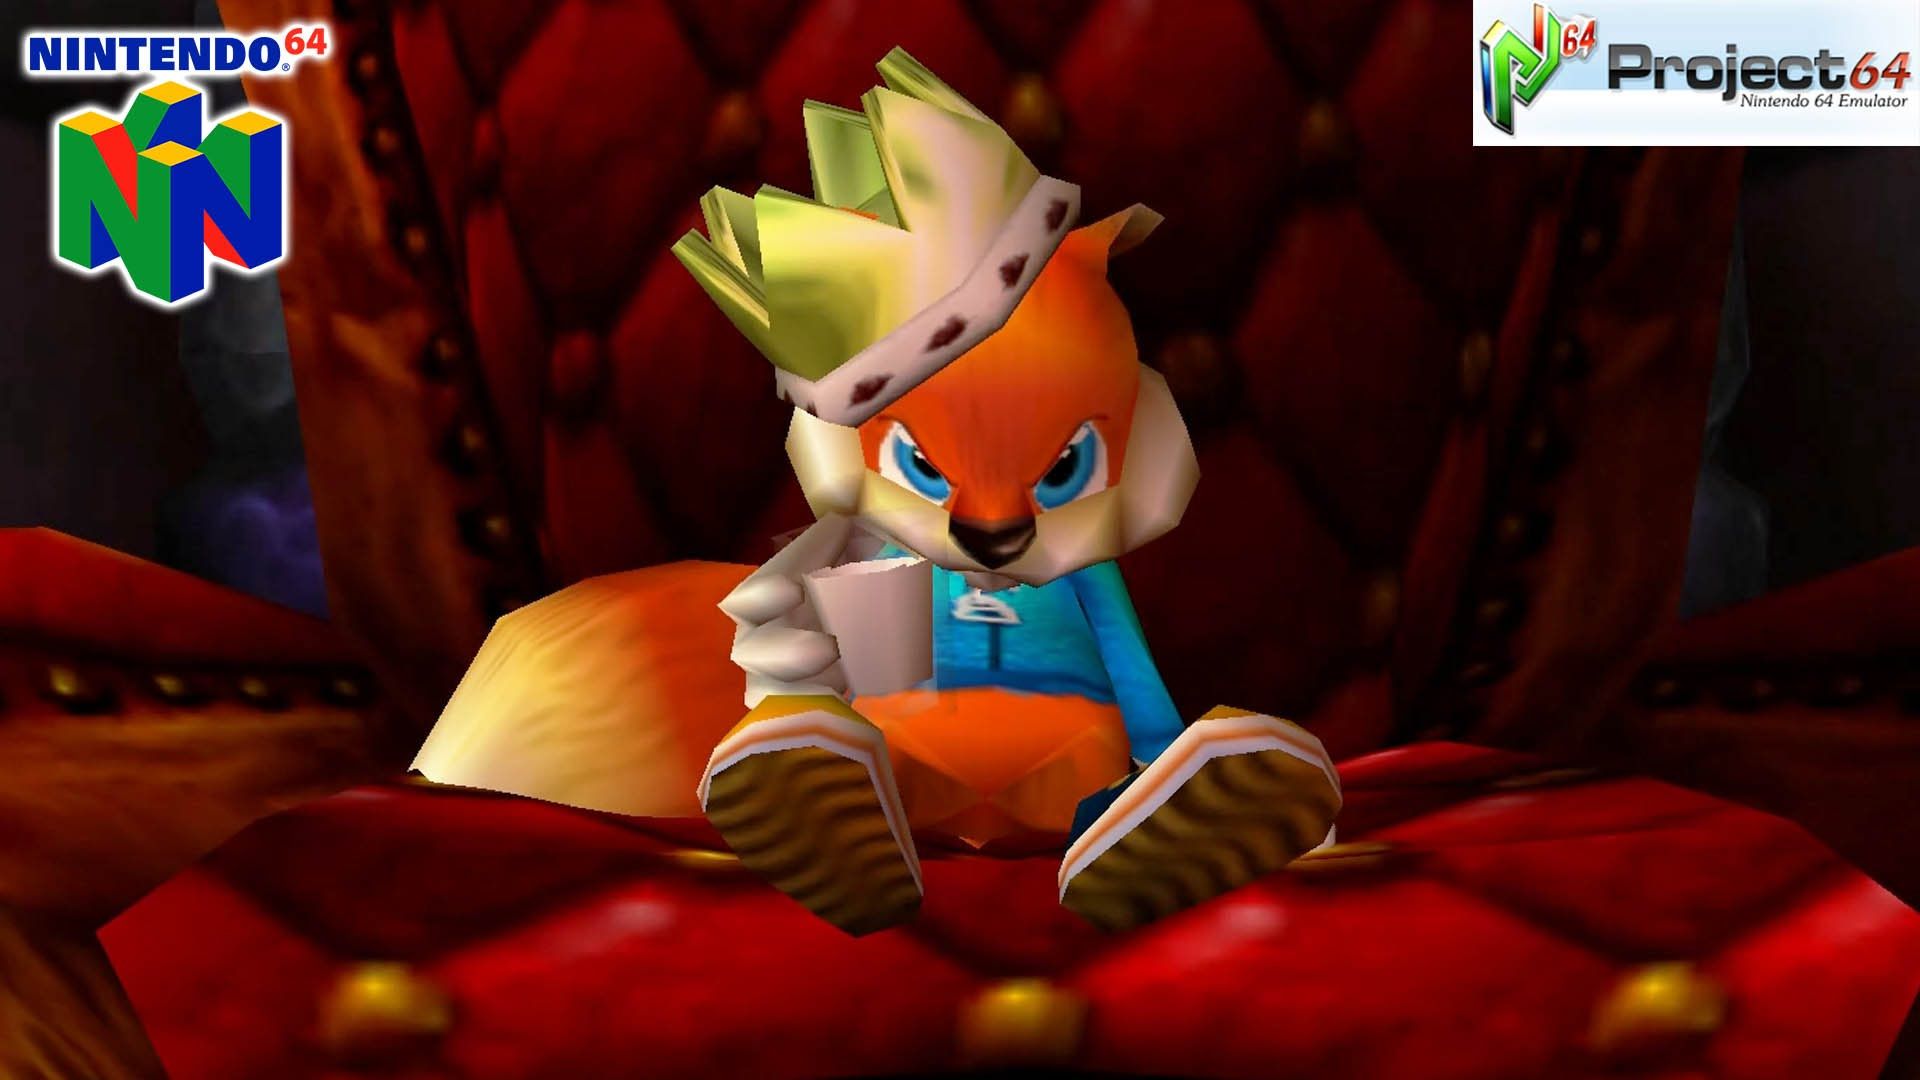 Conker's Bad Fur Day wallpaper, Video Game, HQ Conker's Bad Fur Day pictureK Wallpaper 2019